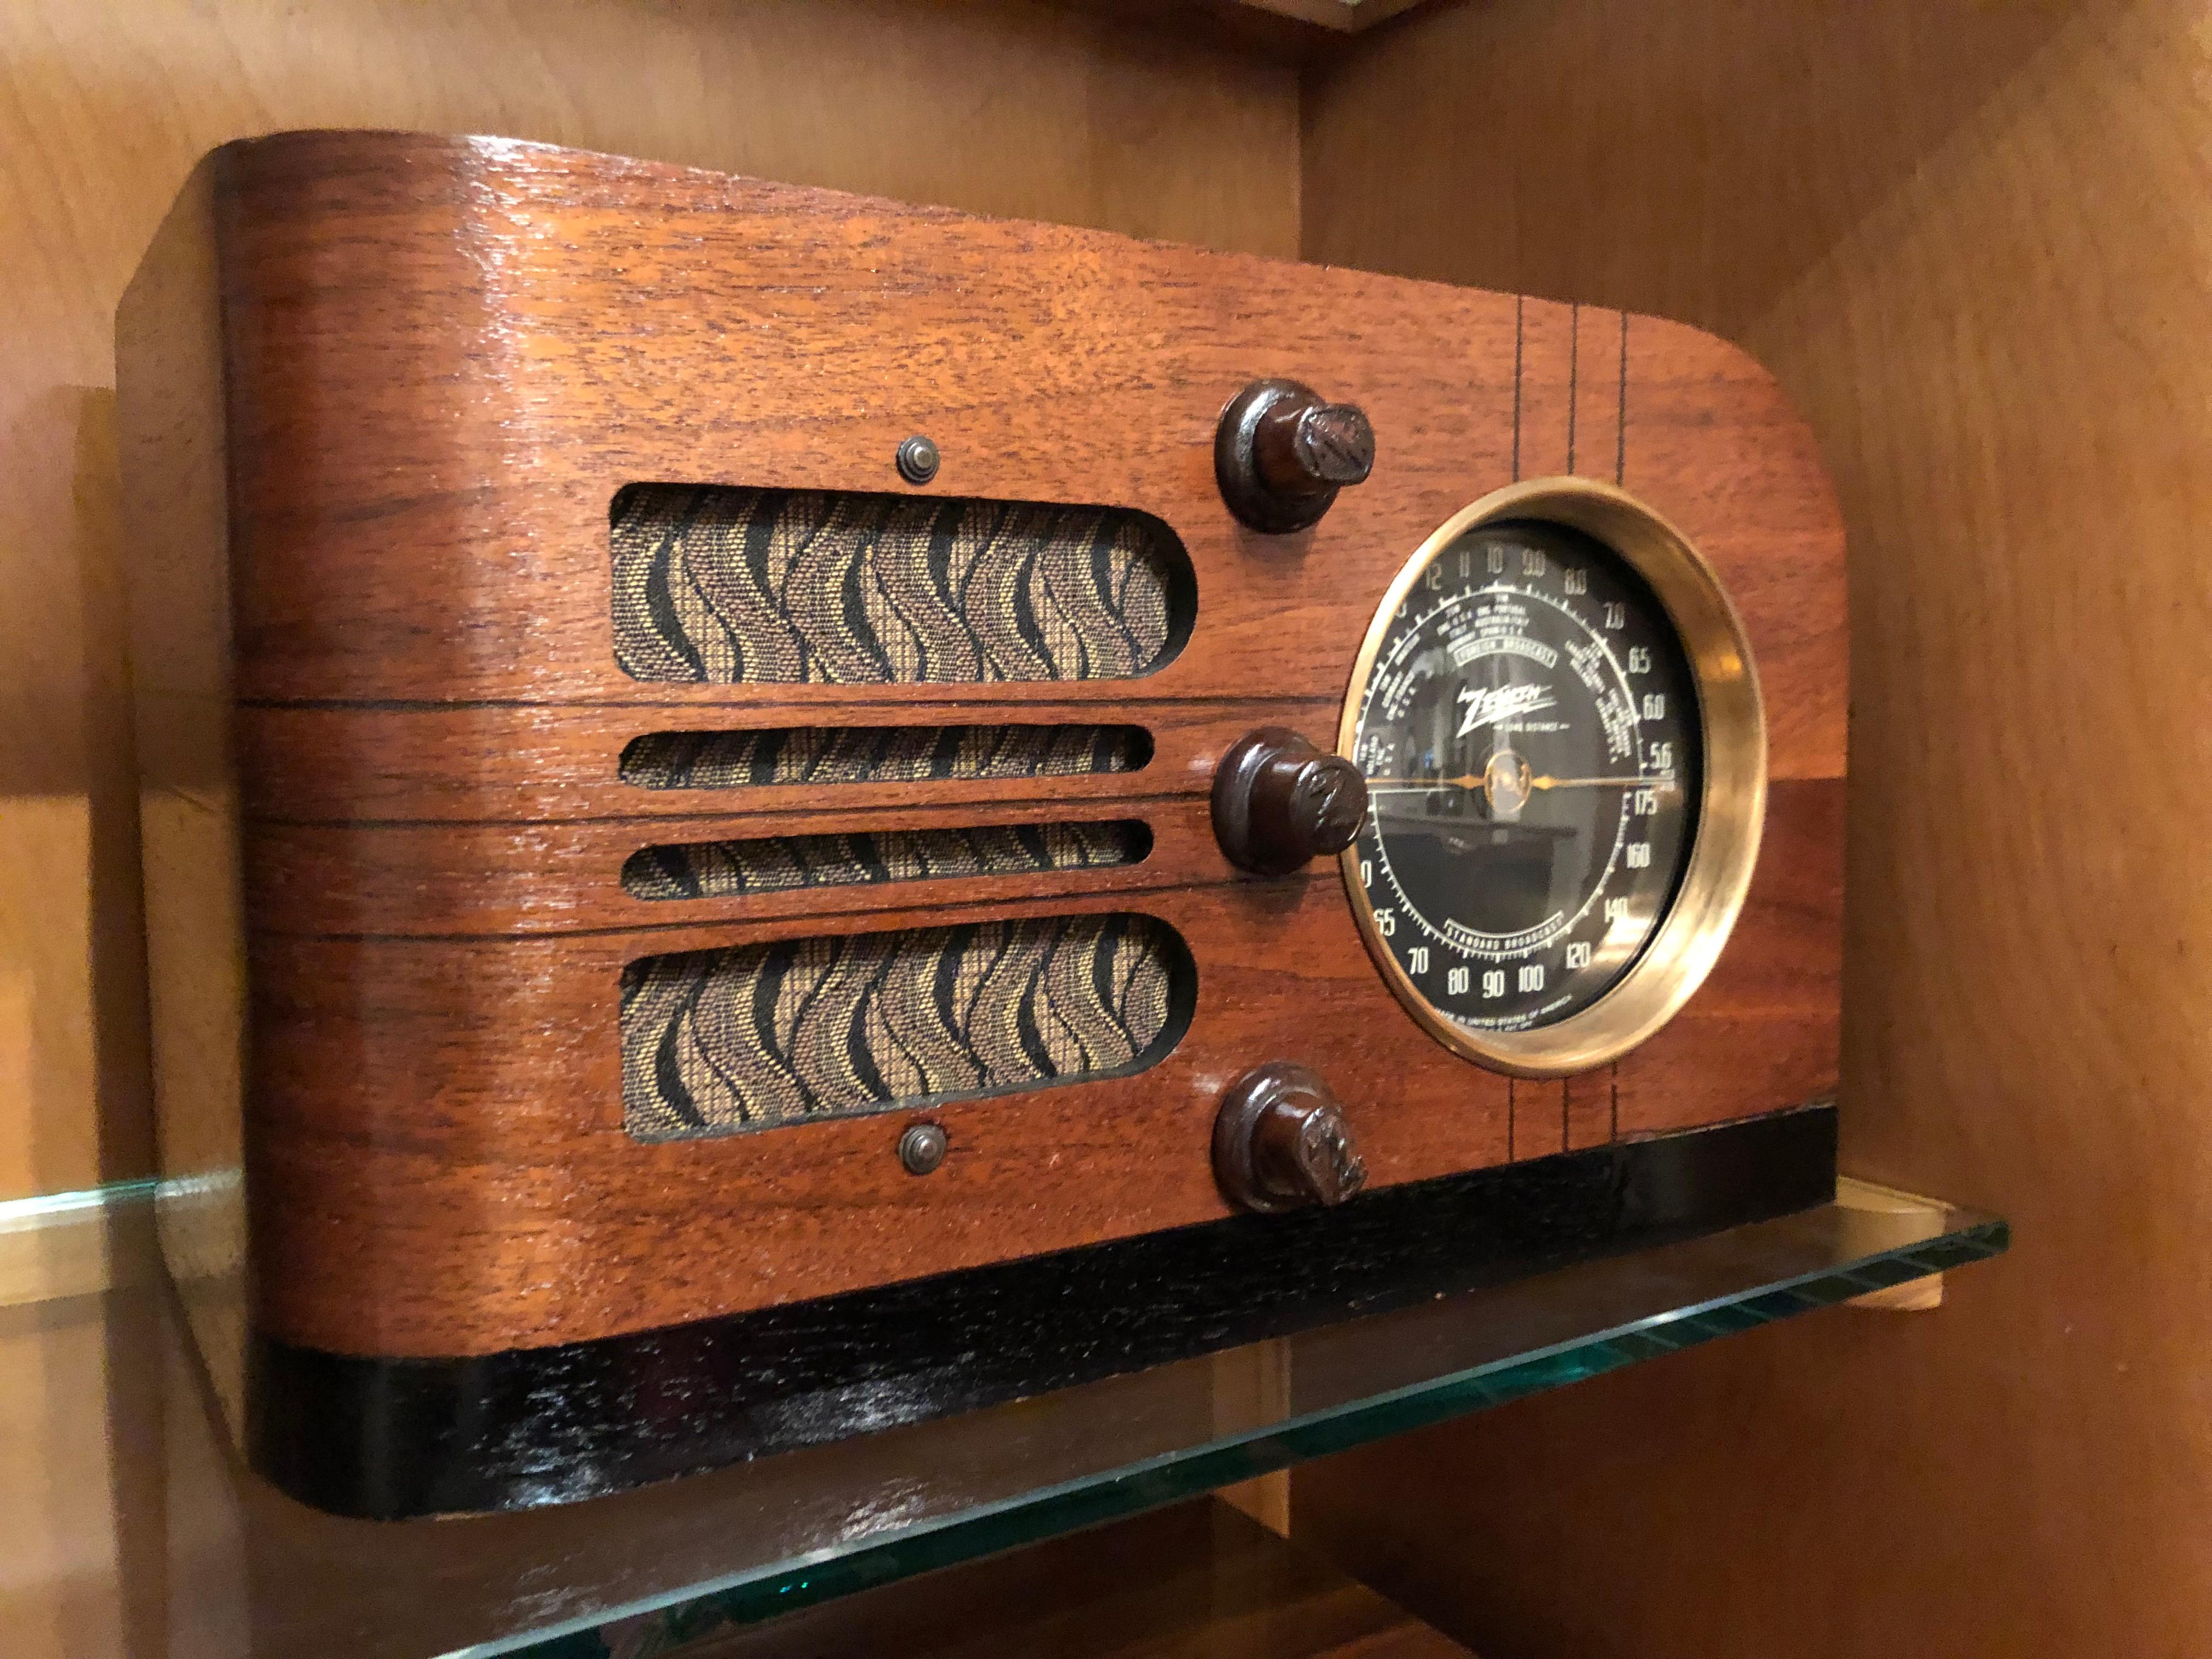 1938 Zenith Model 6-D-219 table top Tube Radio Bluetooth cosmetically and electronically restored. Cabinet refinished with multiple coats of semi-gloss lacquer. Speaker grille cloth is a replacement. Original wooden zenith knobs. Zenith black dial.